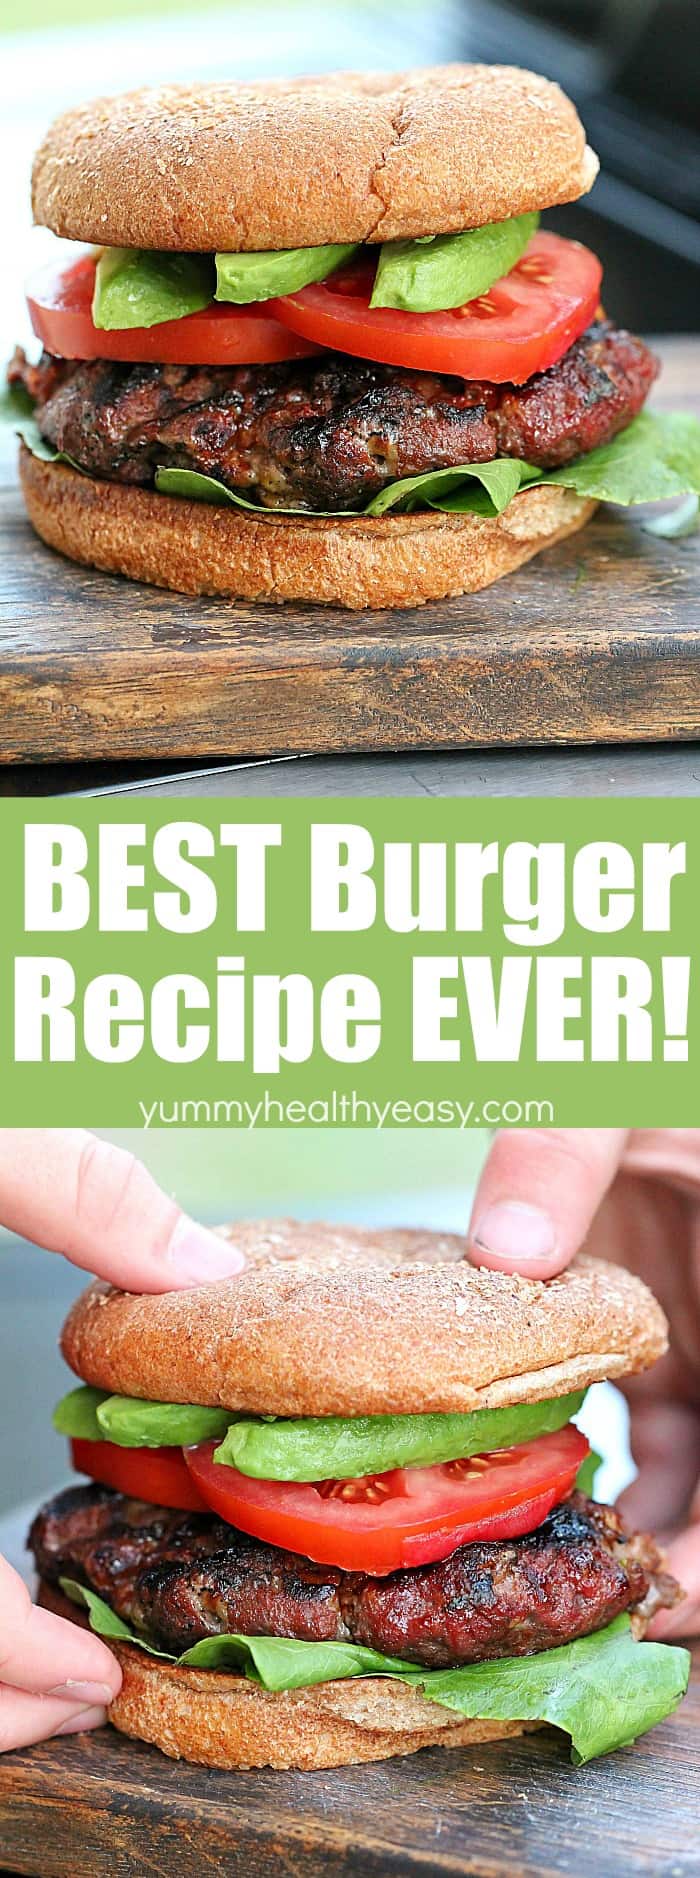 My family LOVES this Best Burger Recipe Ever!! It's my go-to whenever I make burgers. Quick and easy to make and makes a tender and juicy burger every time!! #burgers #easy #recipe #grill #bbq #dinner #yummy #beef #hamburgers